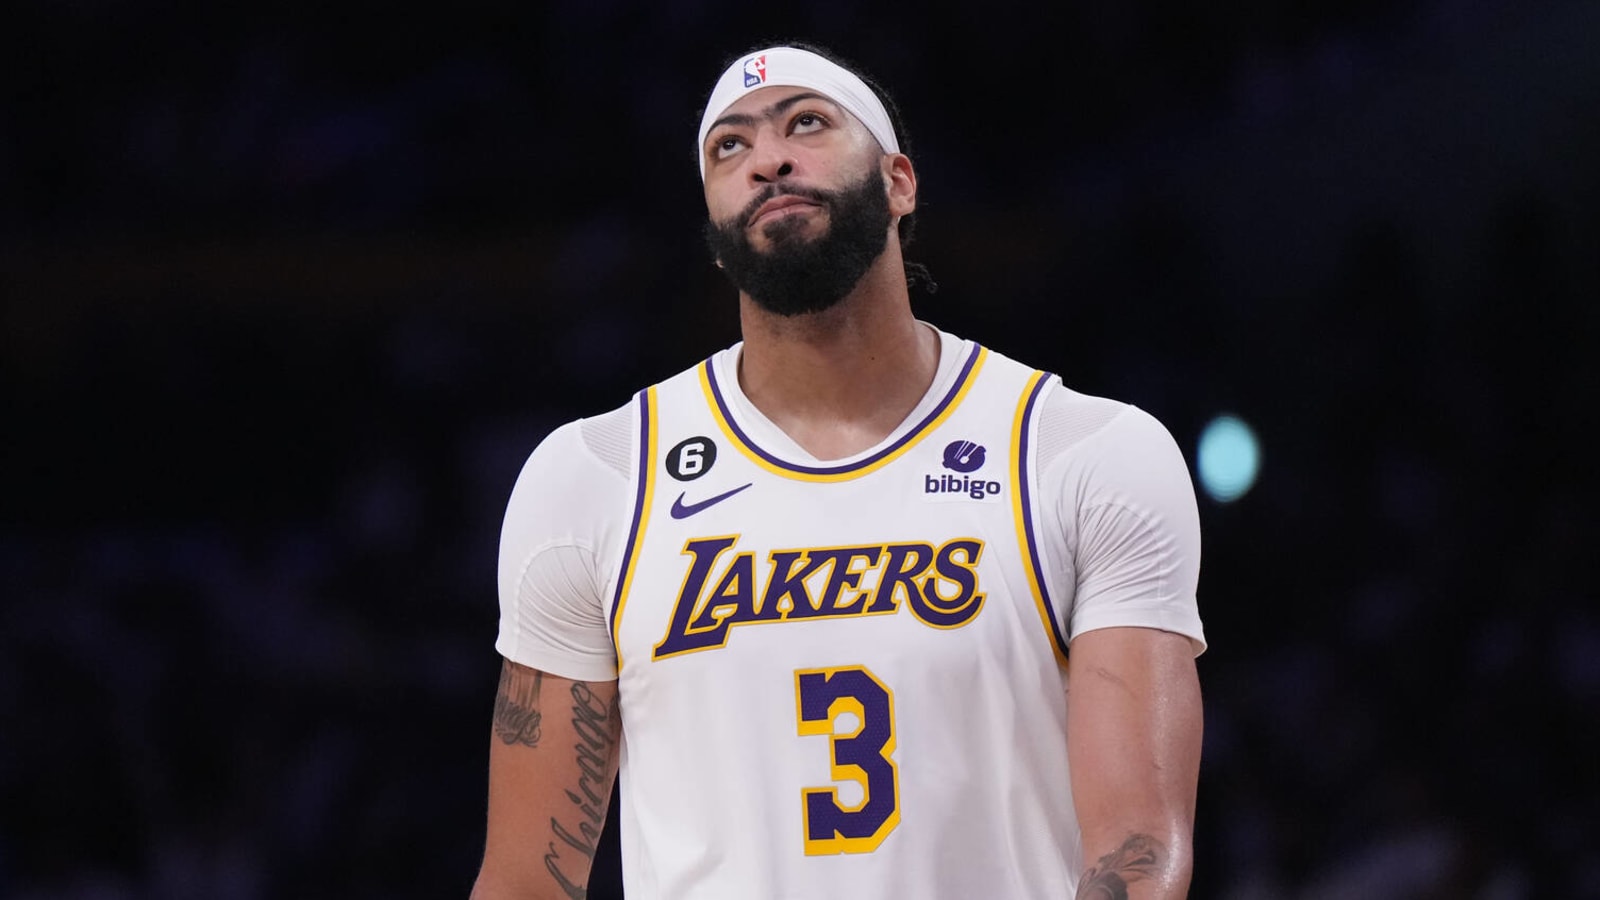 Lakers star becomes eligible for contract extension